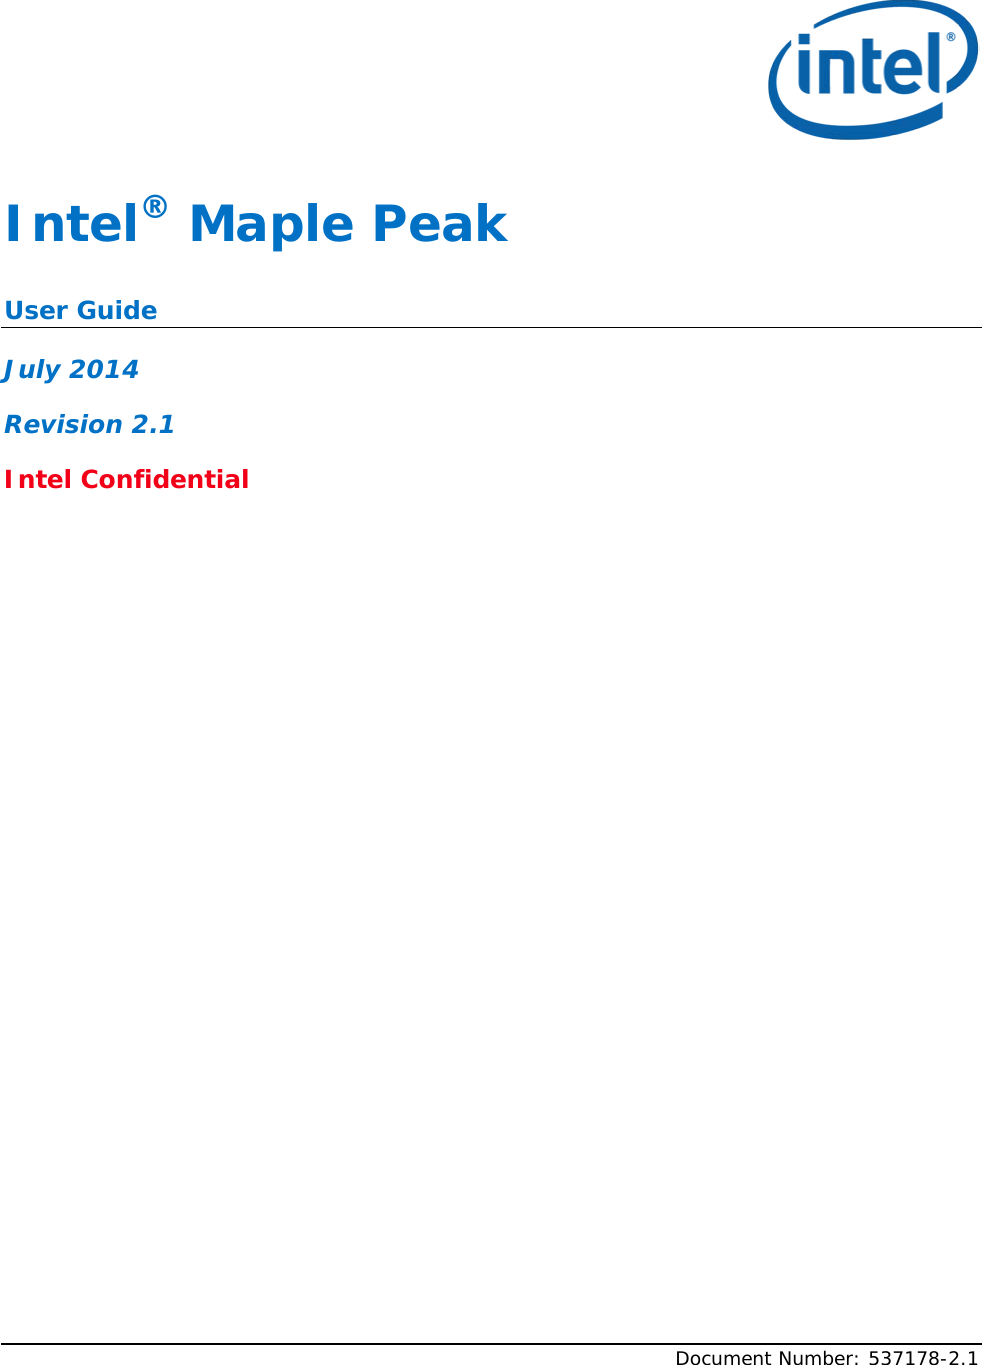    Intel® Maple Peak User Guide July 2014 Revision 2.1 Intel Confidential      Document Number: 537178-2.1 